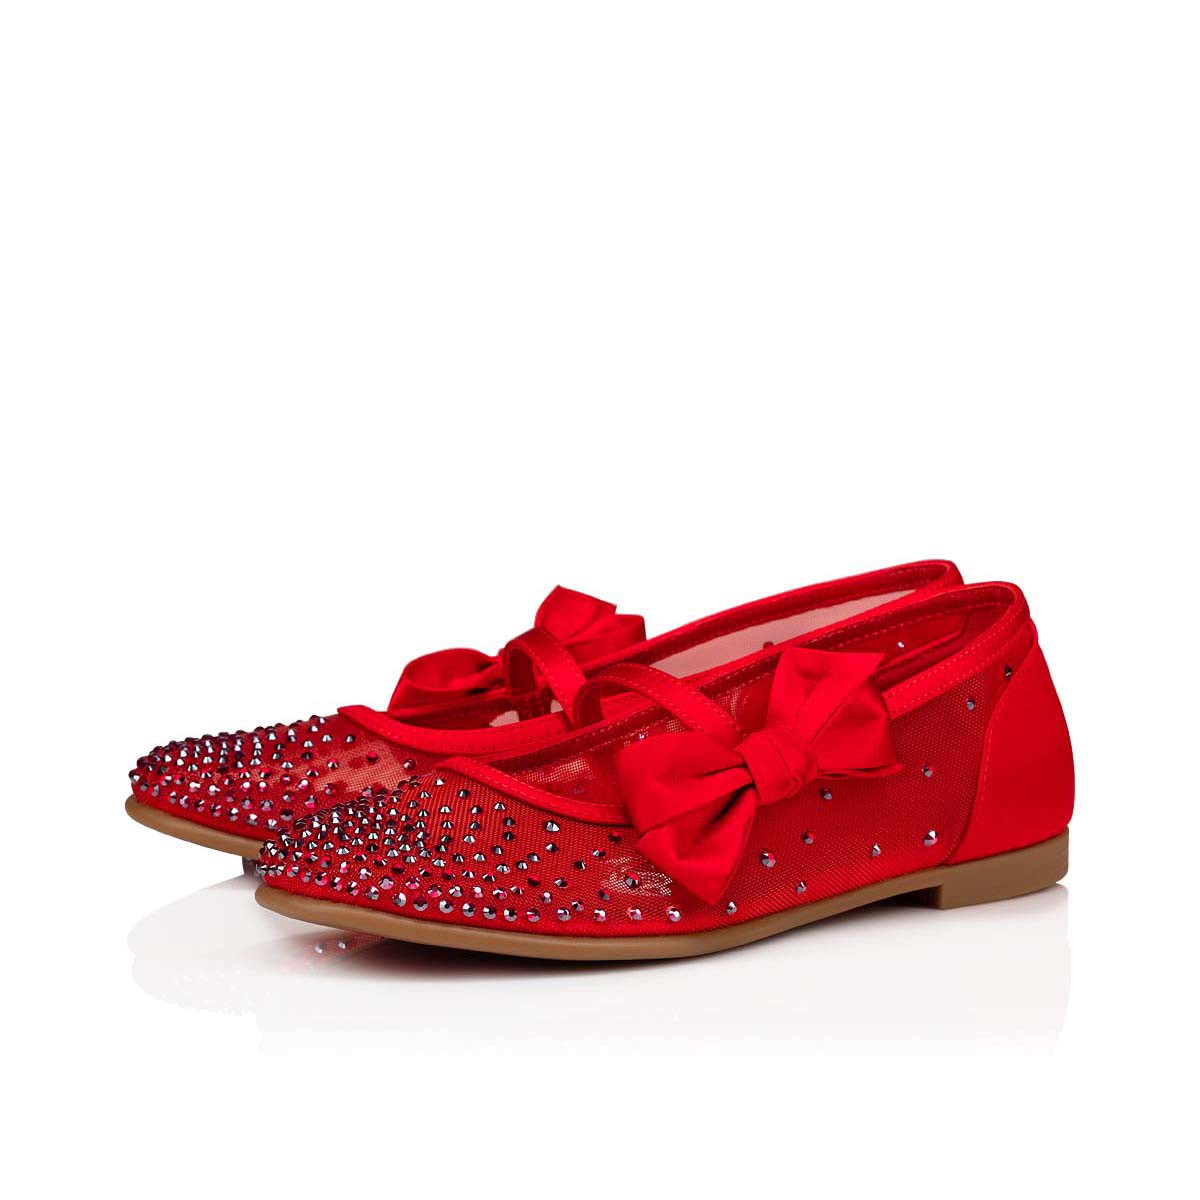 Melodie Strass Red Mesh - Unisex Kid Shoes - Christian Louboutin